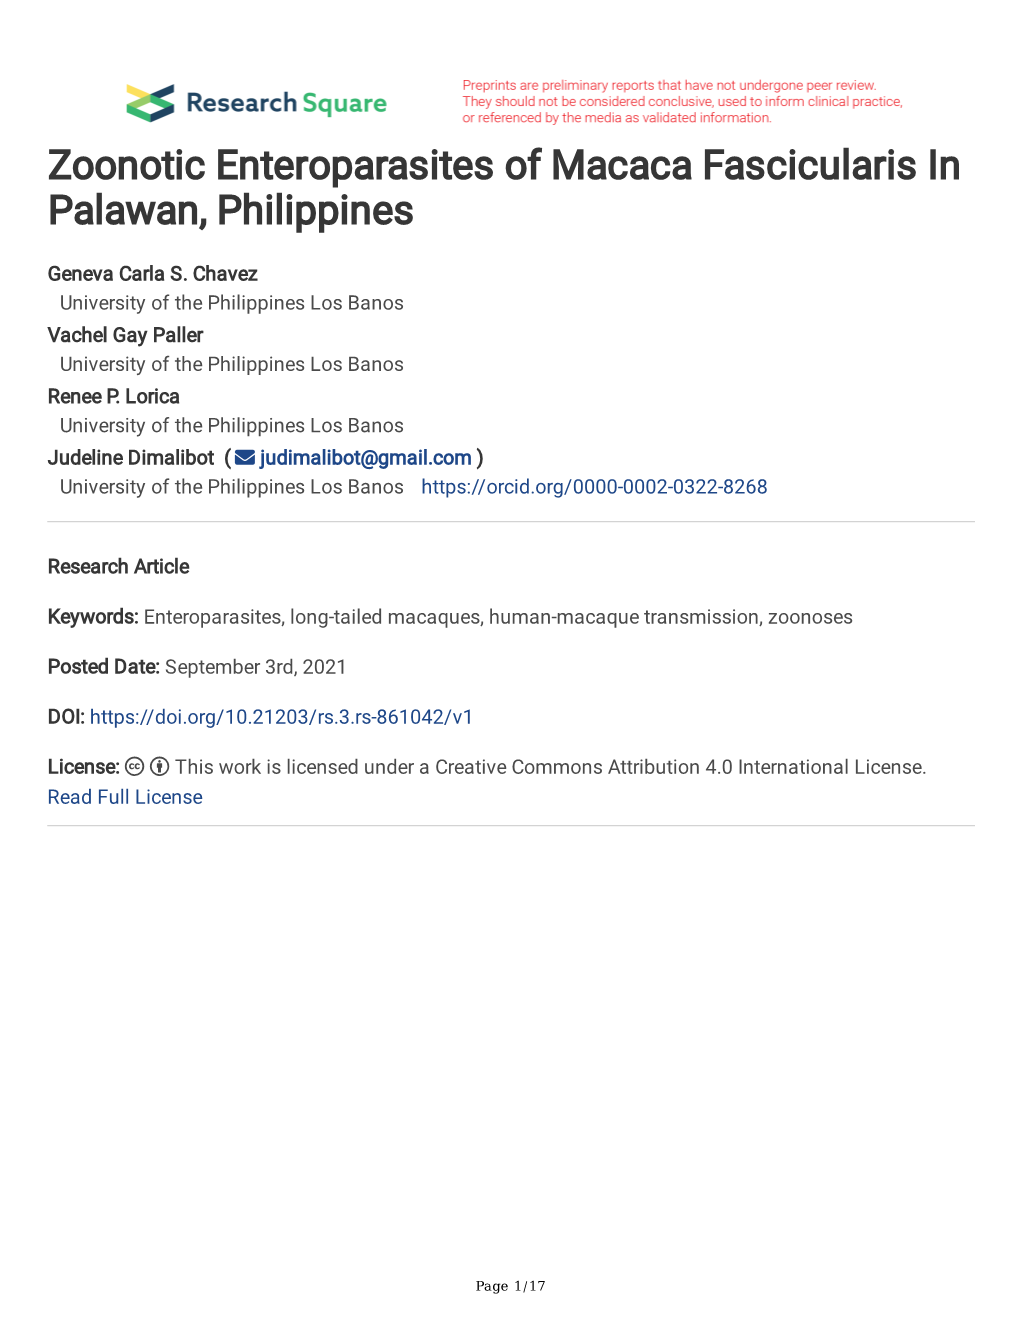 Zoonotic Enteroparasites of Macaca Fascicularis in Palawan, Philippines